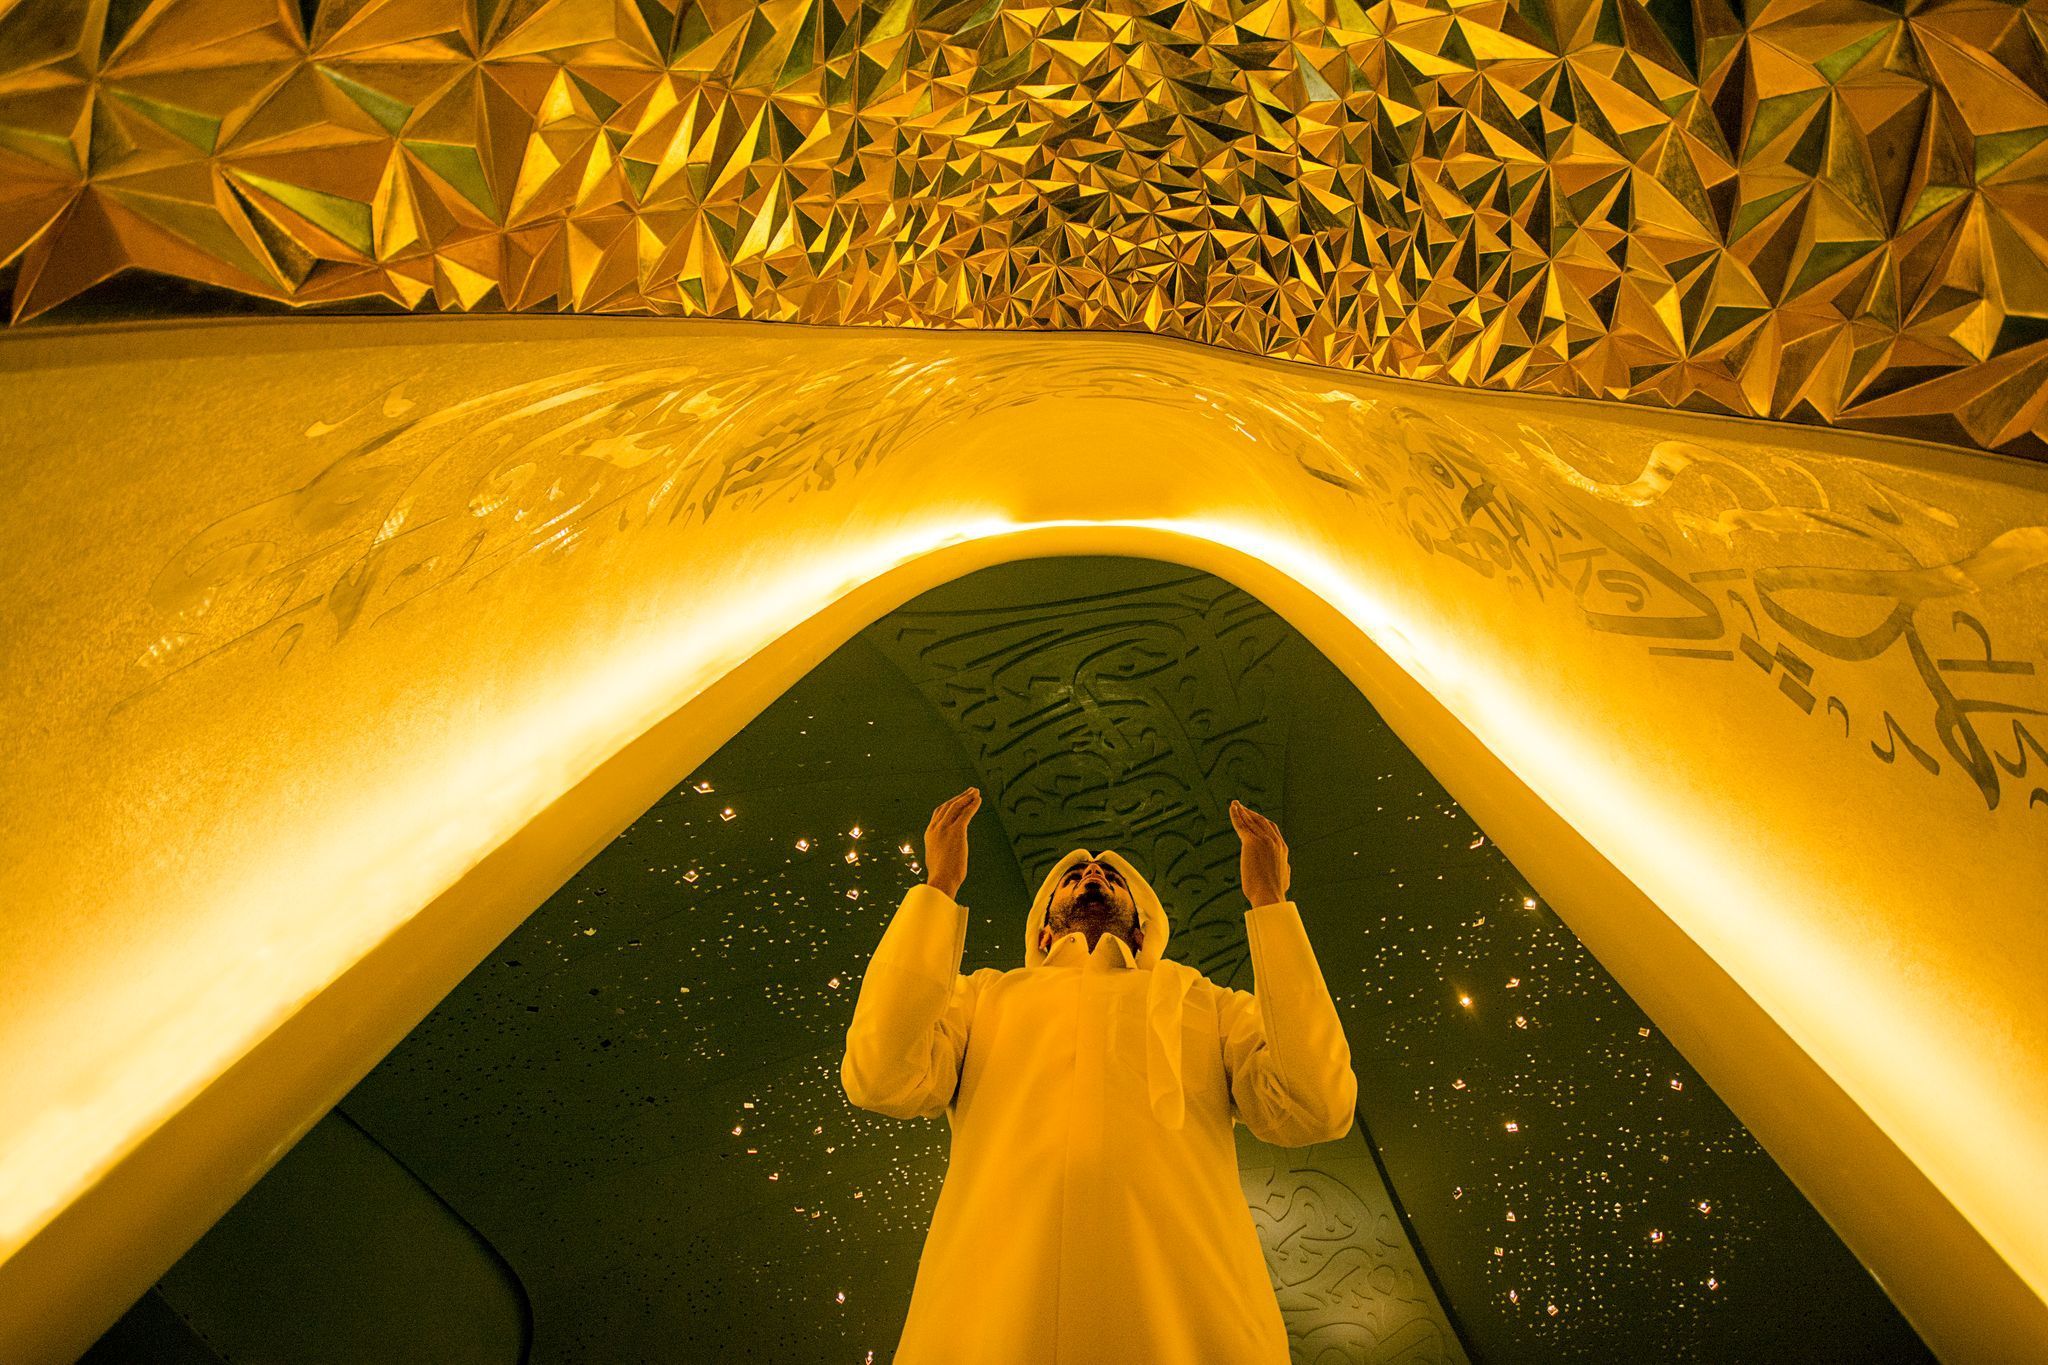 A man wearing all white stands under an illuminated golden archway, with his palms facing upwards during prayer. 